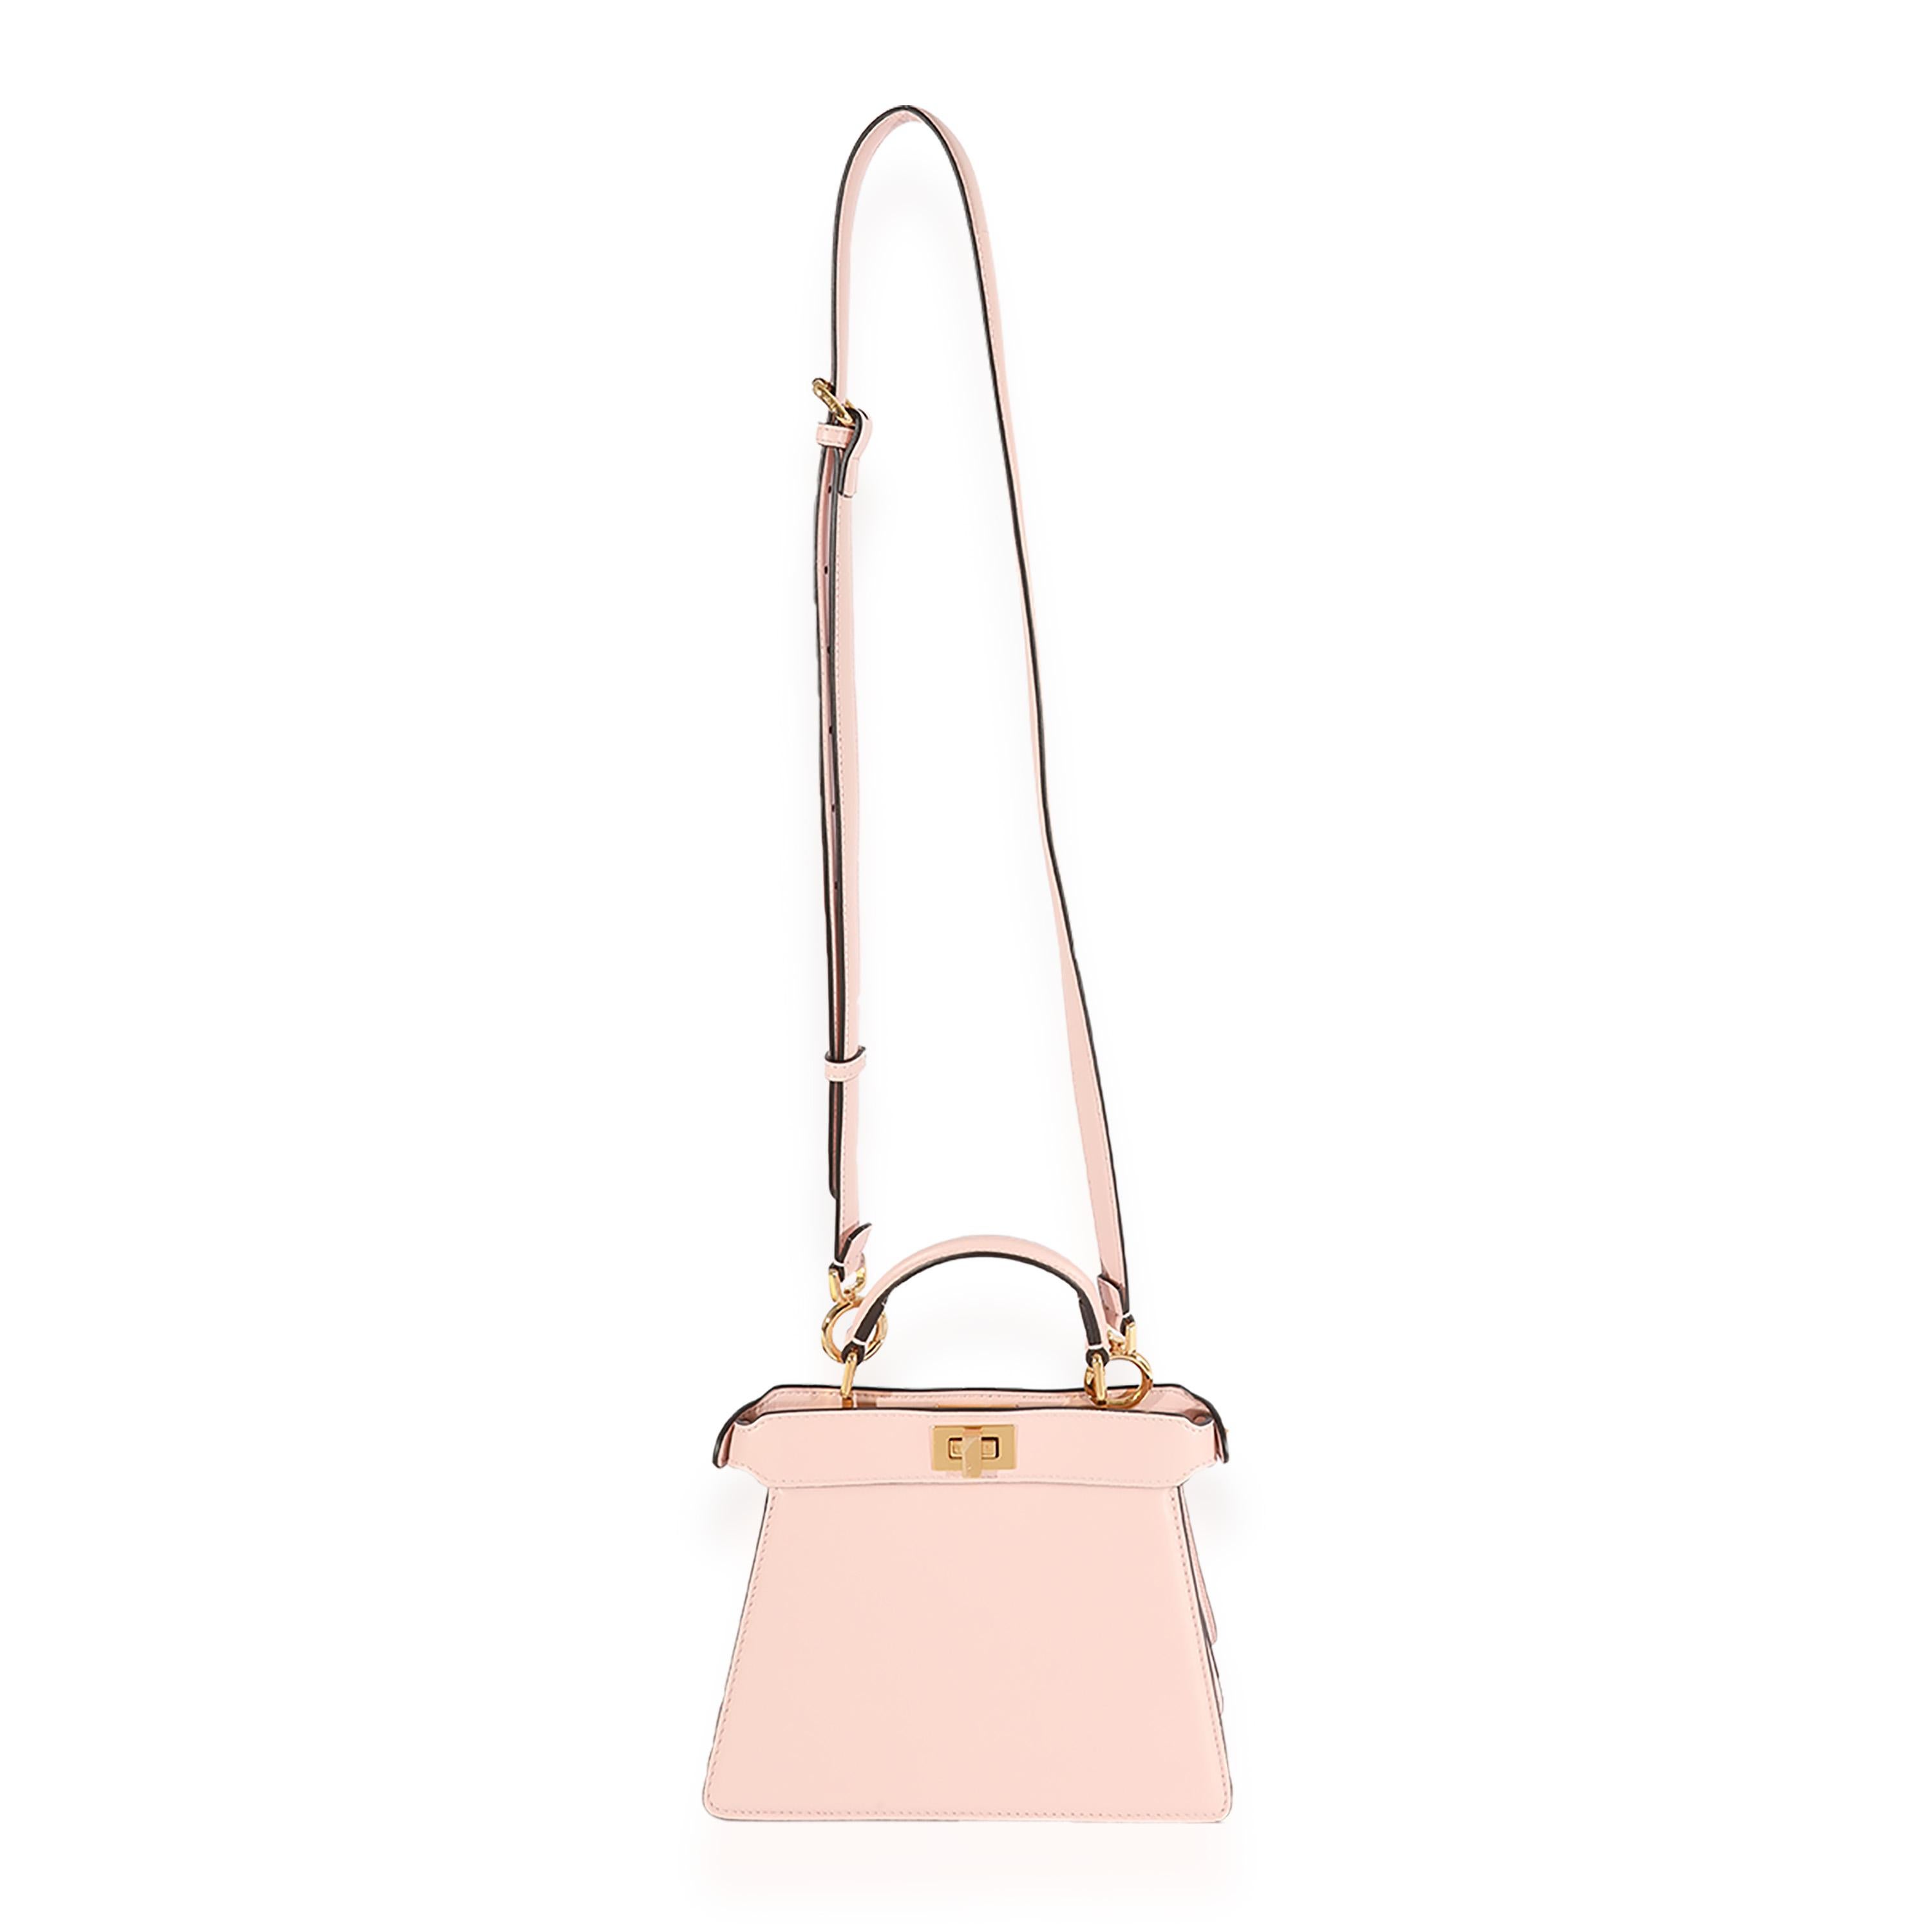 Listing Title: Fendi Pink Padded Nappa Leather Peekaboo ISeeU Petite
SKU: 123411
MSRP: 3750.00
Condition: Pre-owned 
Handbag Condition: Excellent
Condition Comments: Excellent Condition. Plastic on some hardware. No visible signs of wear.
Brand: